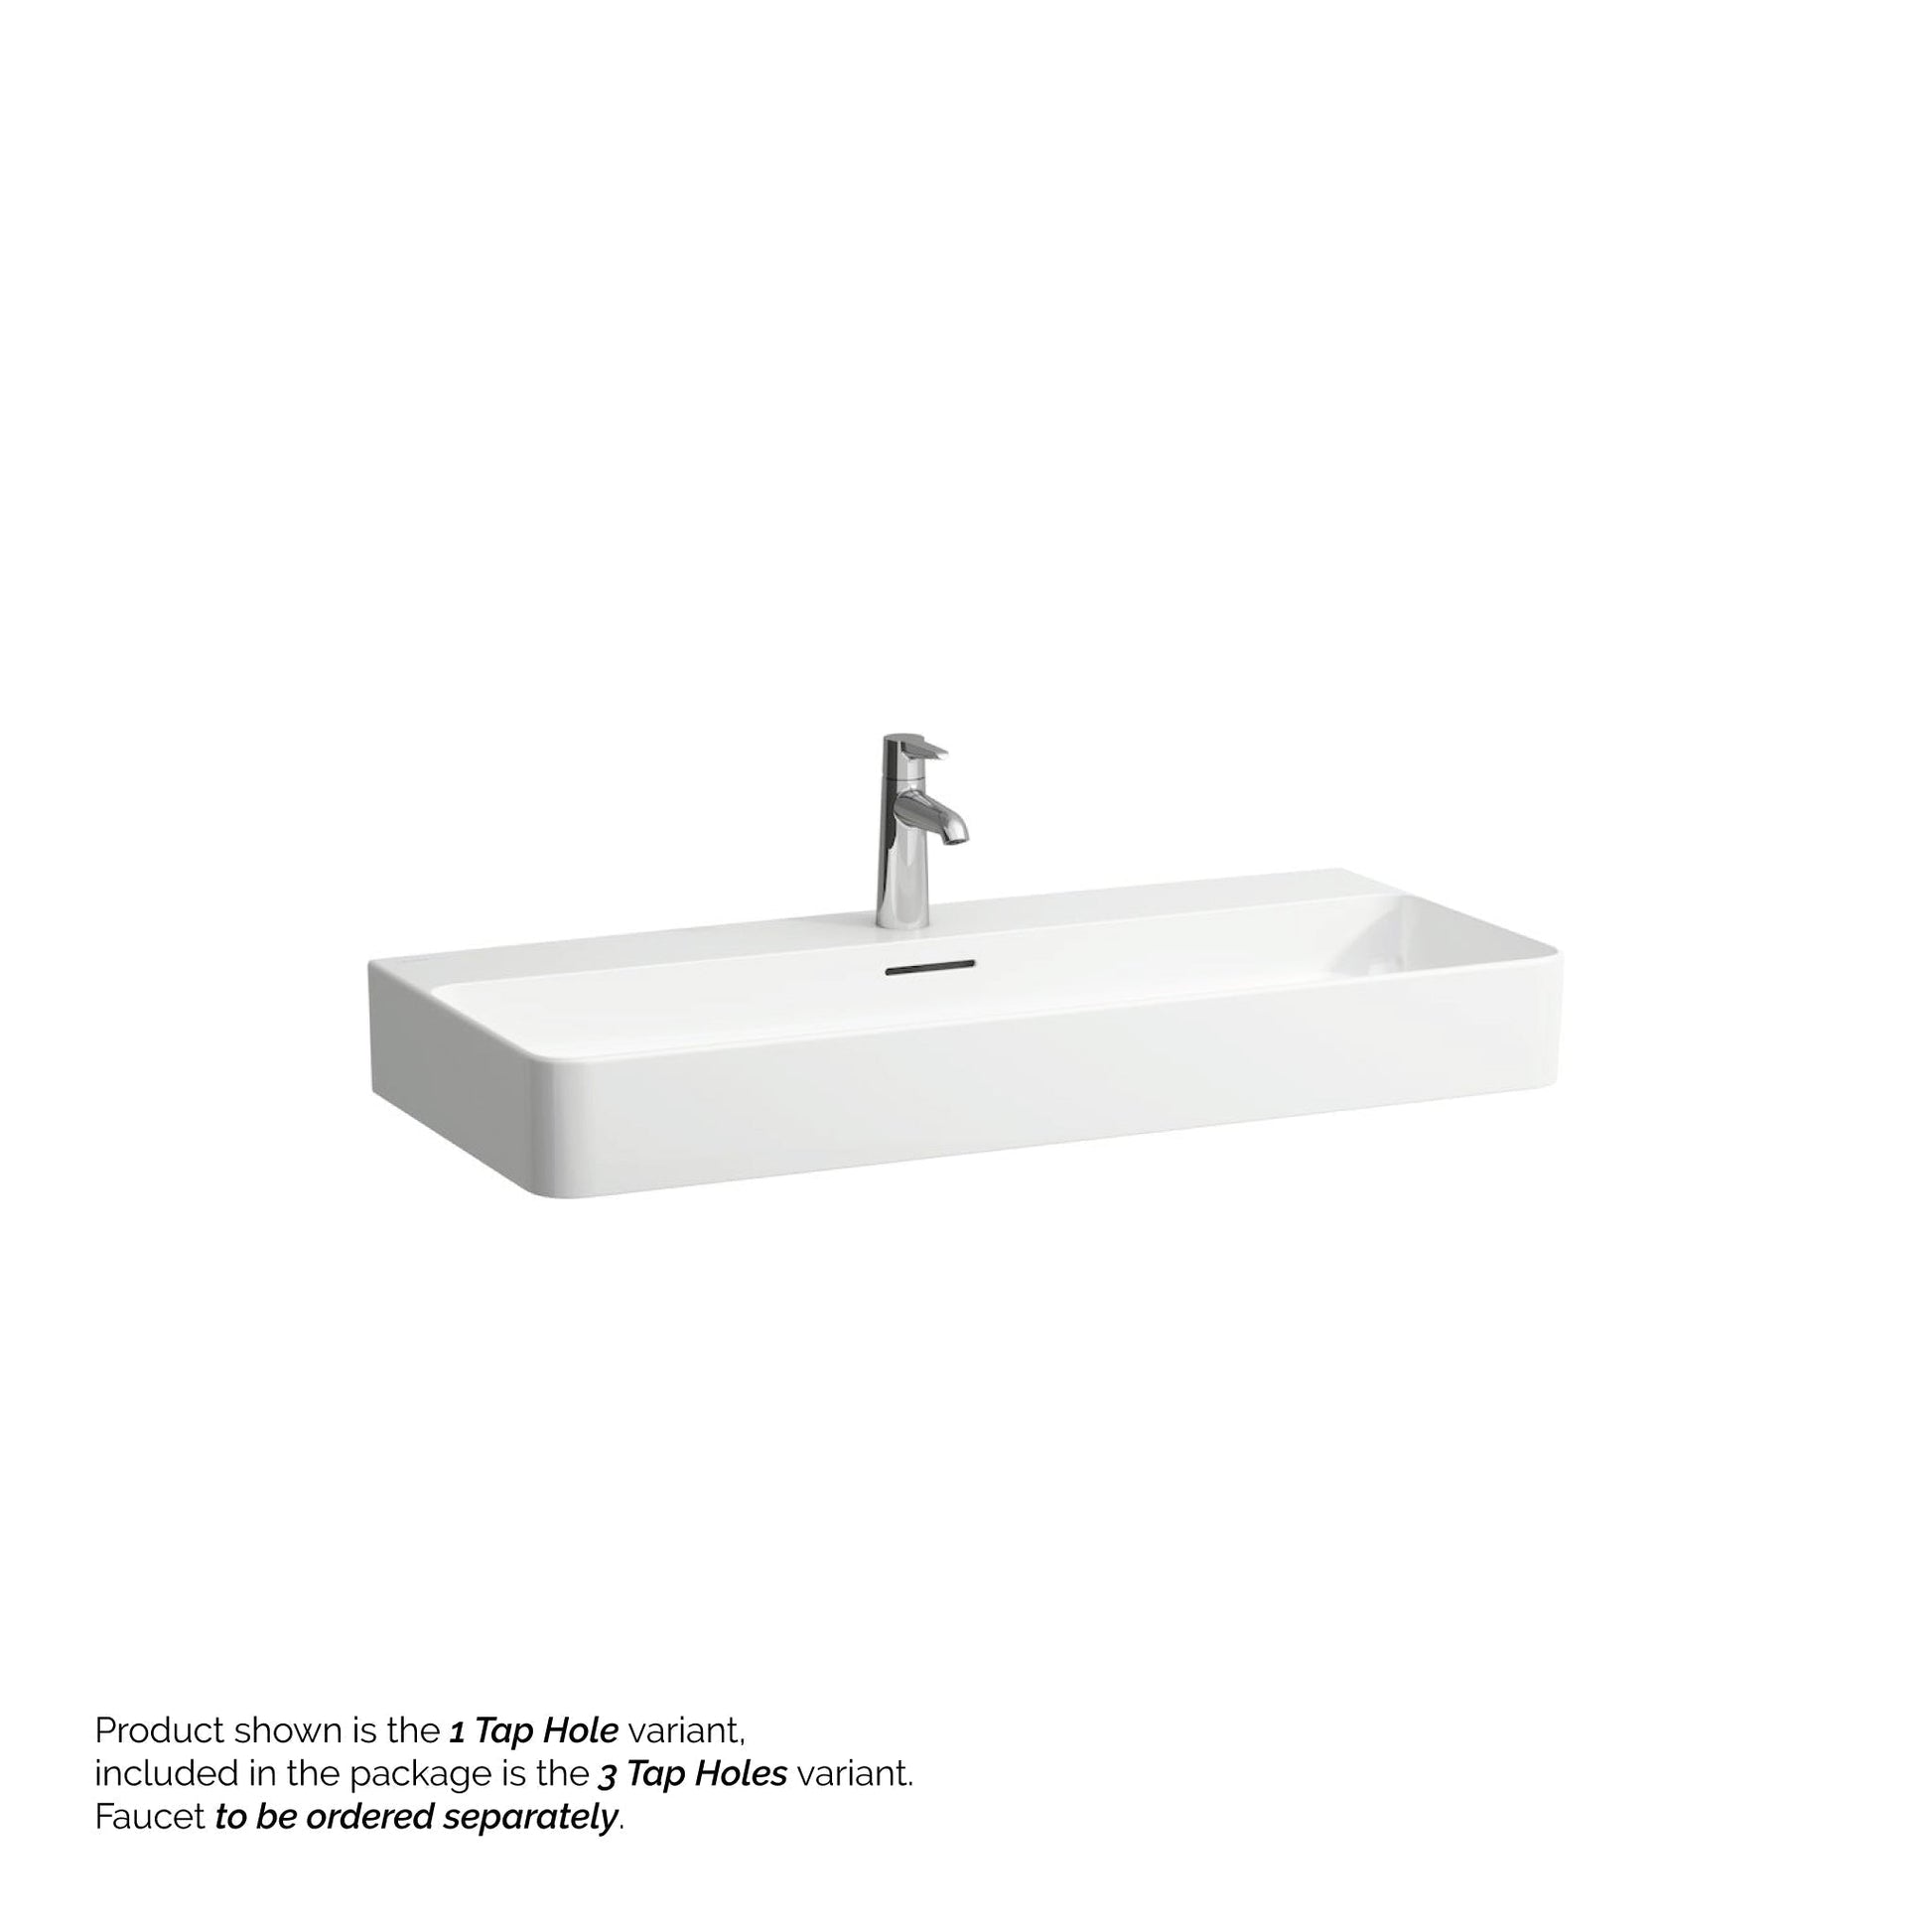 Laufen Val 37" x 17" Matte White Ceramic Countertop Bathroom Sink With 3 Faucet Holes